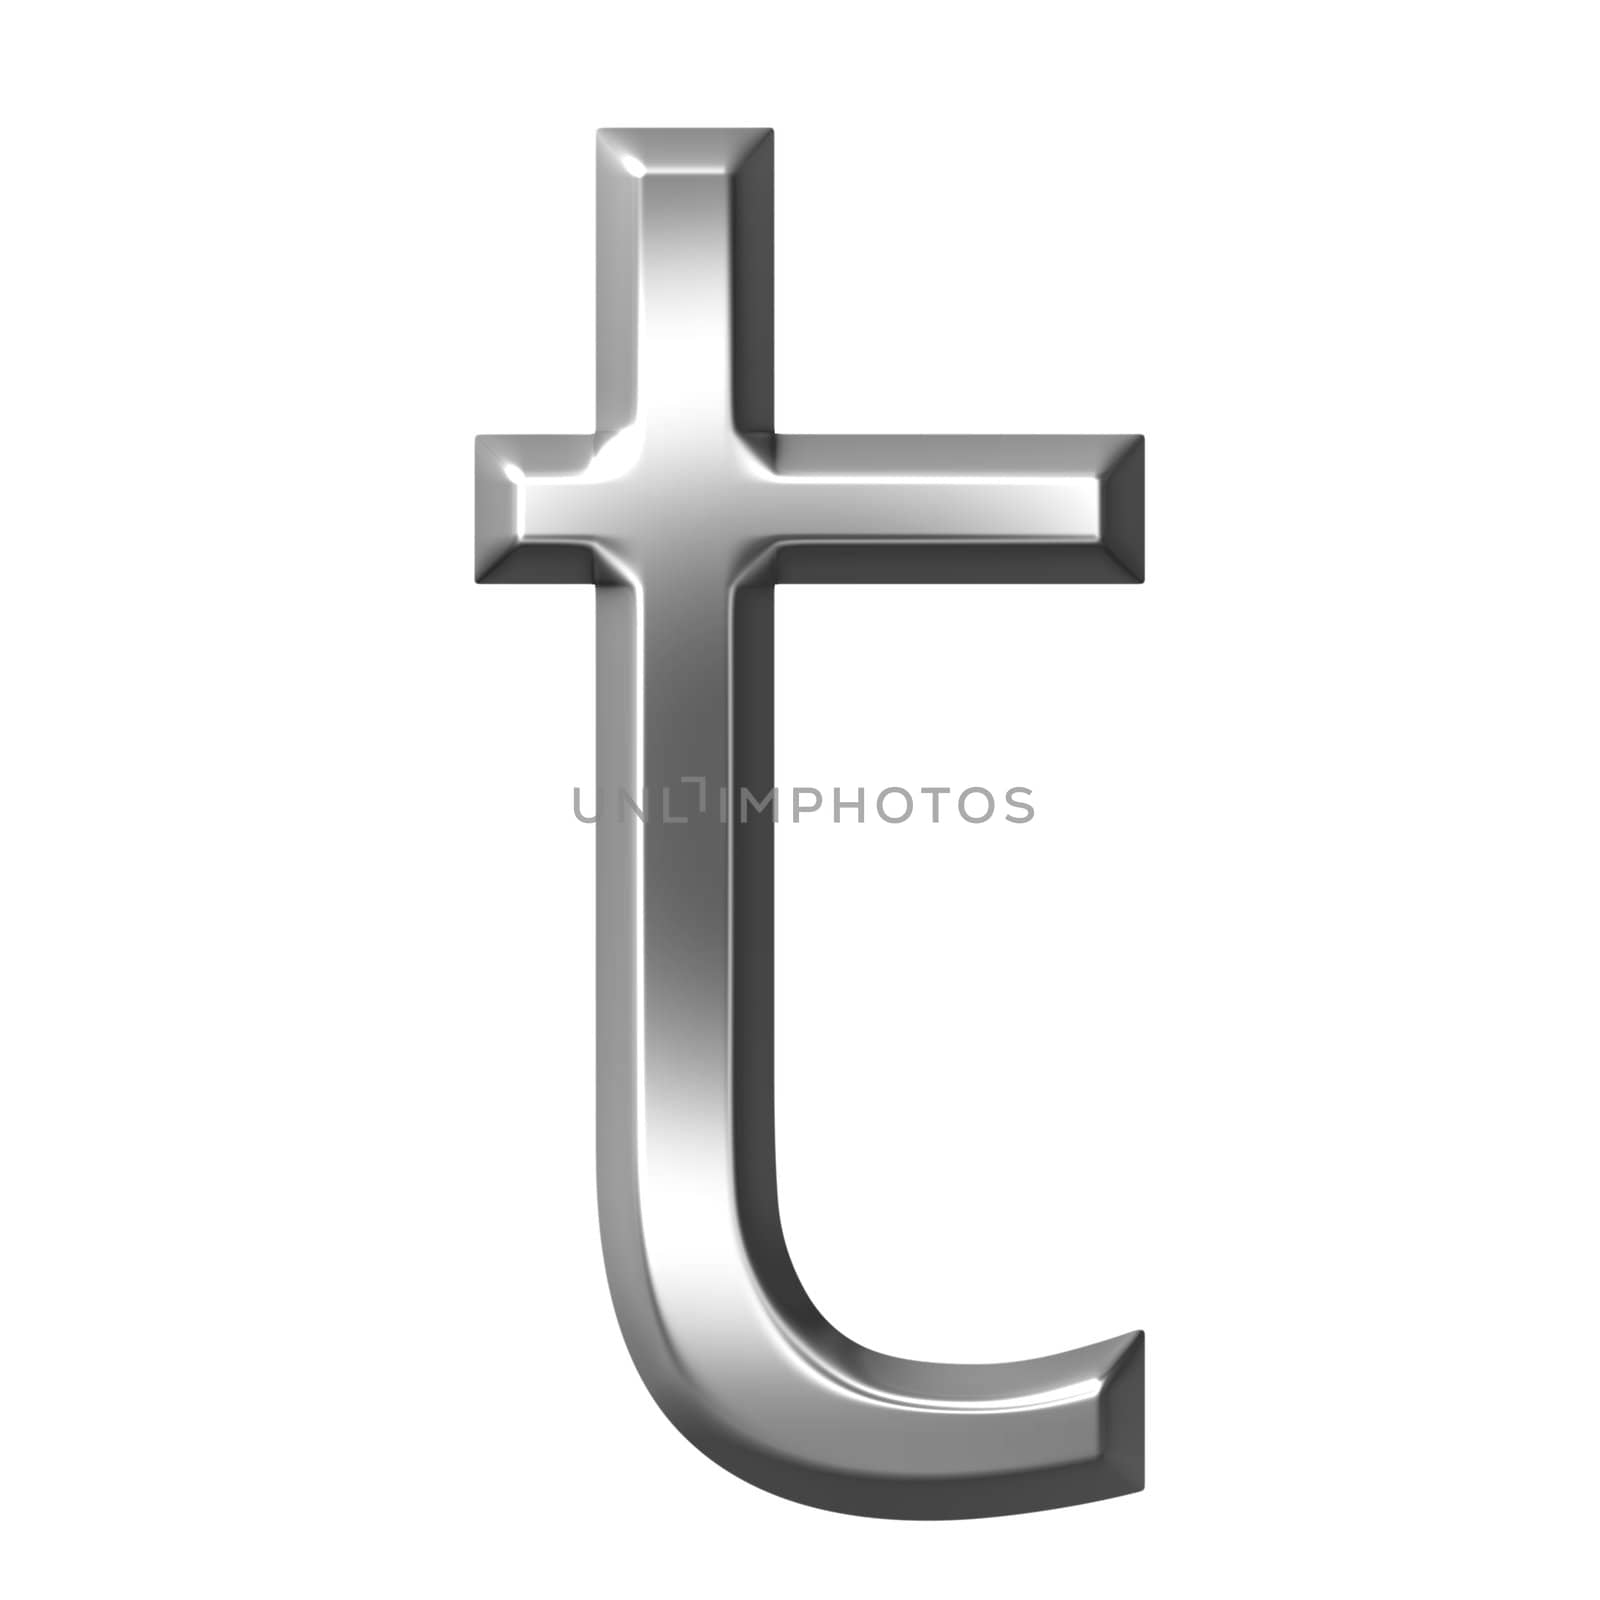 3d silver letter t isolated in white